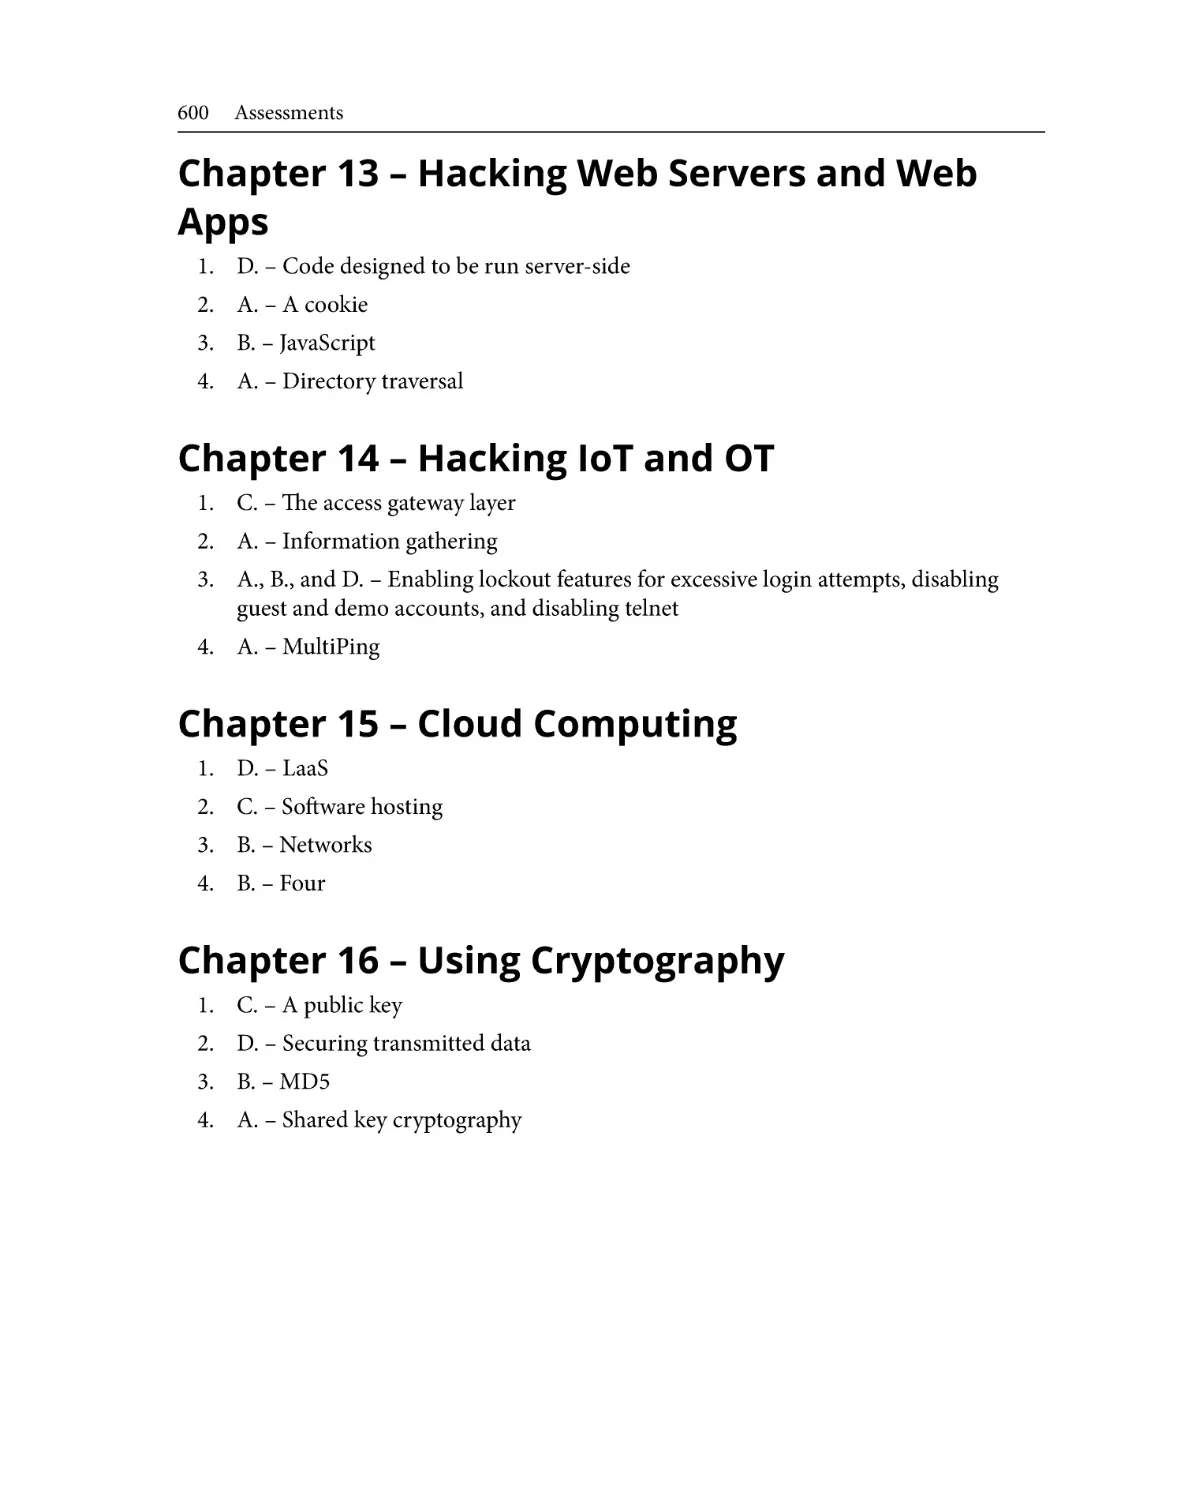 Chapter 13 – Hacking Web Servers and Web Apps
Chapter 14 – Hacking IoT and OT
Chapter 15 – Cloud Computing
Chapter 16 – Using Cryptography